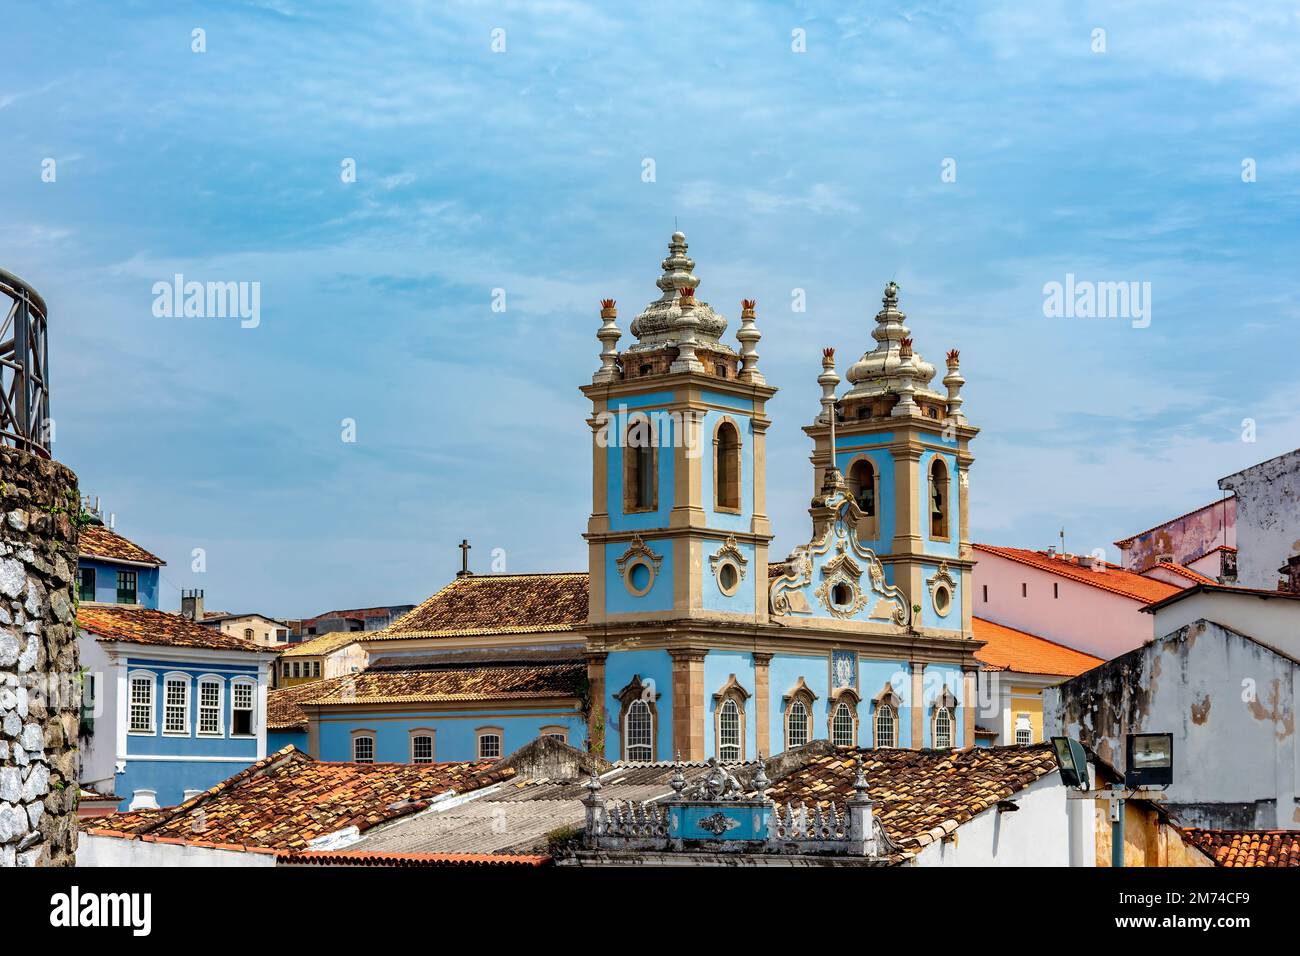 Tower and facade of a historic baroque church emerging from among the houses and roofs of the Pelourinho district, city of Salvador, Bahia Stock Photo